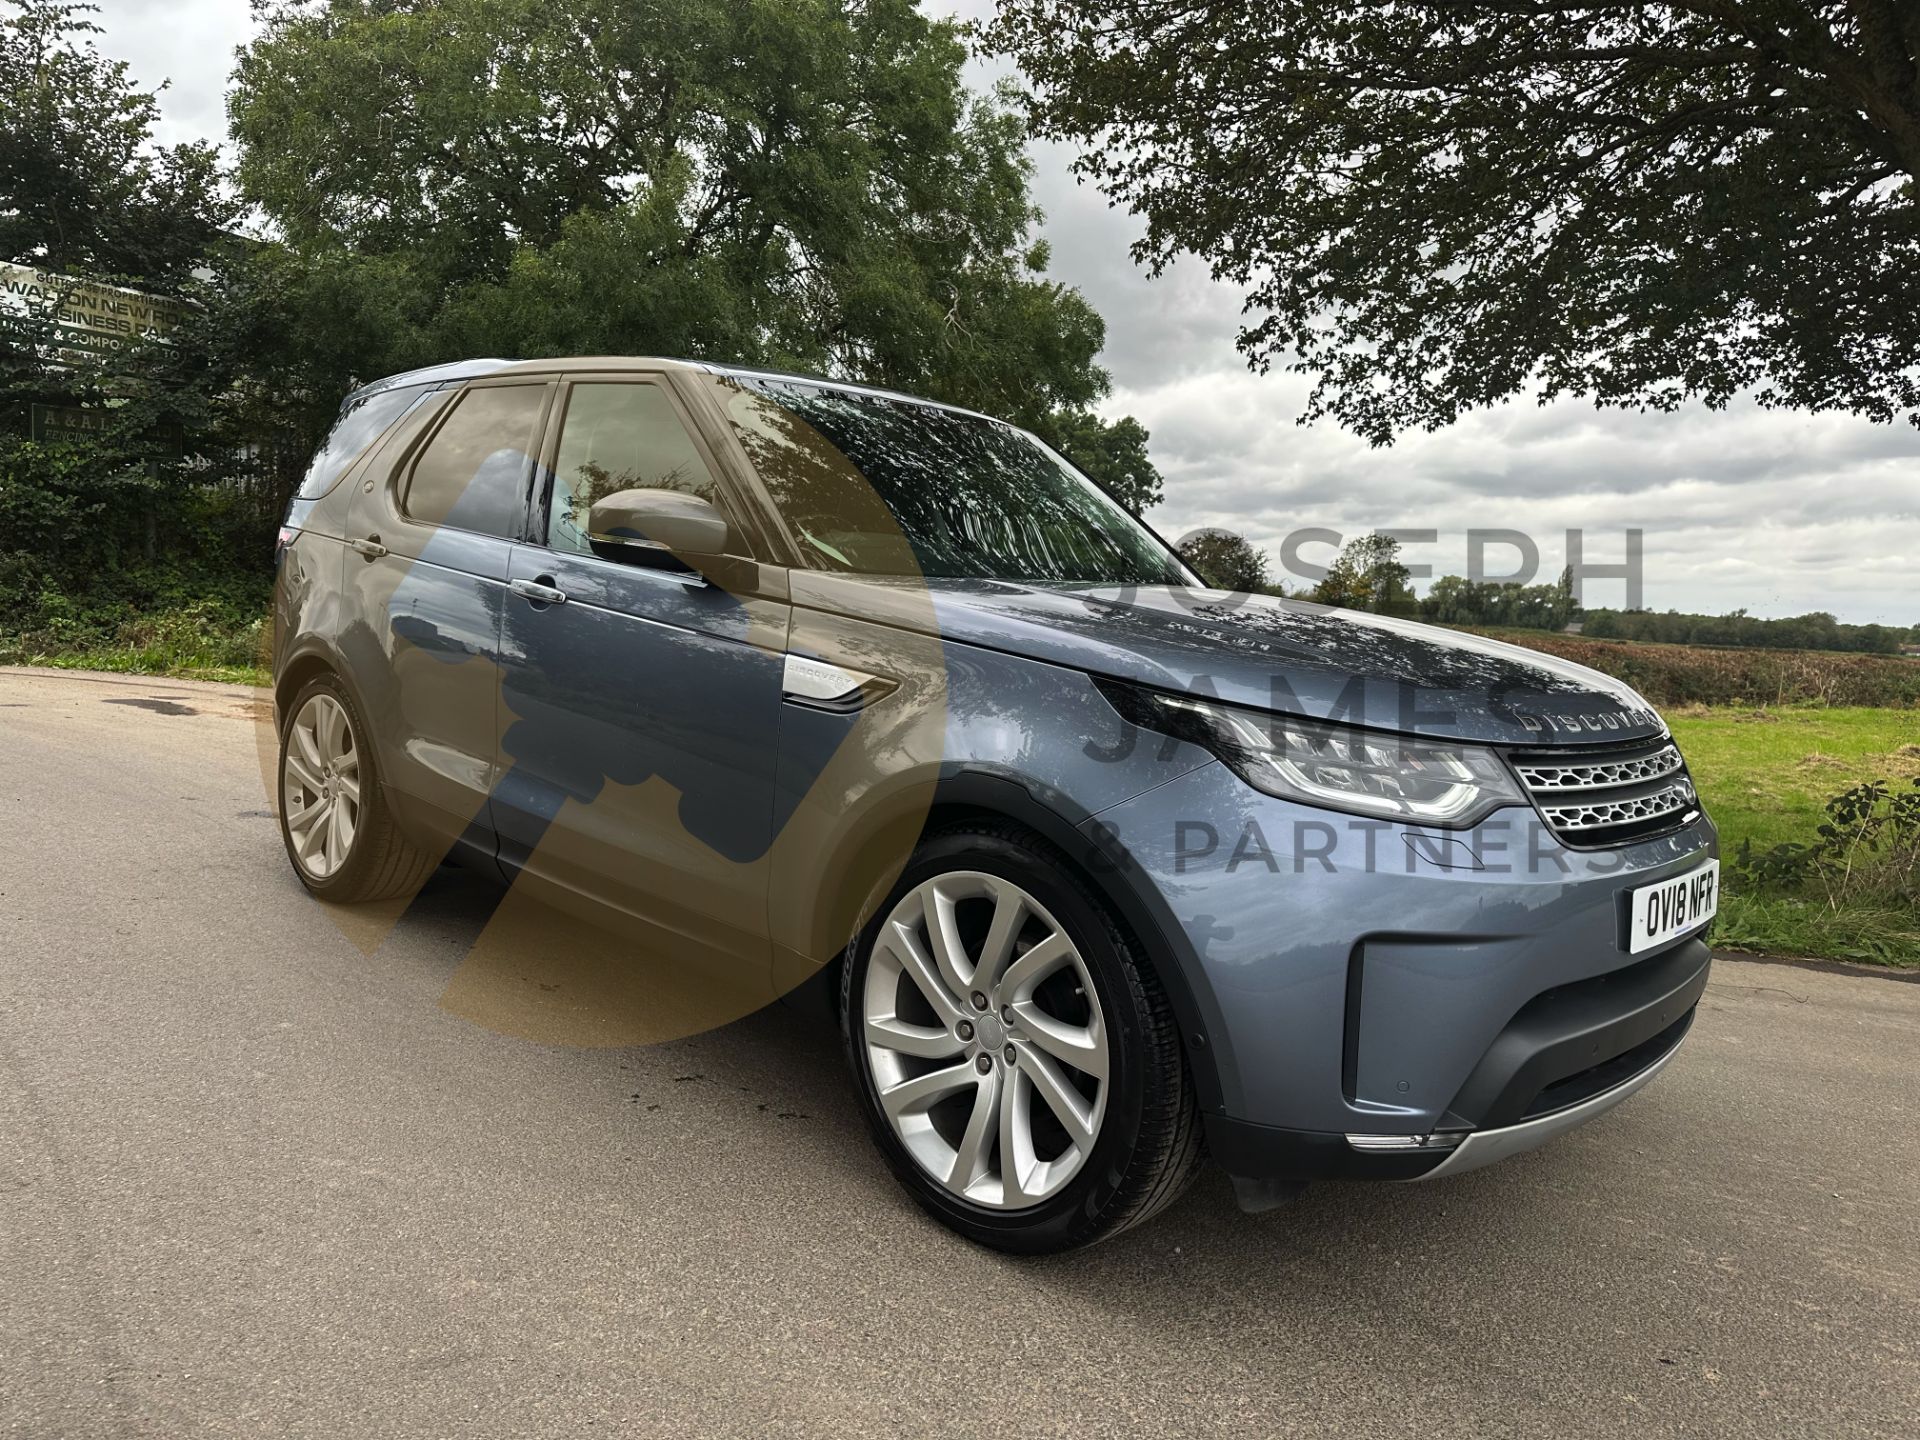 (ON SALE) LAND ROVER DISCOVERY 5 *HSE LUXURY* 7 SEATER SUV (2018 - FACELIFT MODEL) (LOW MILEAGE) - Image 3 of 66